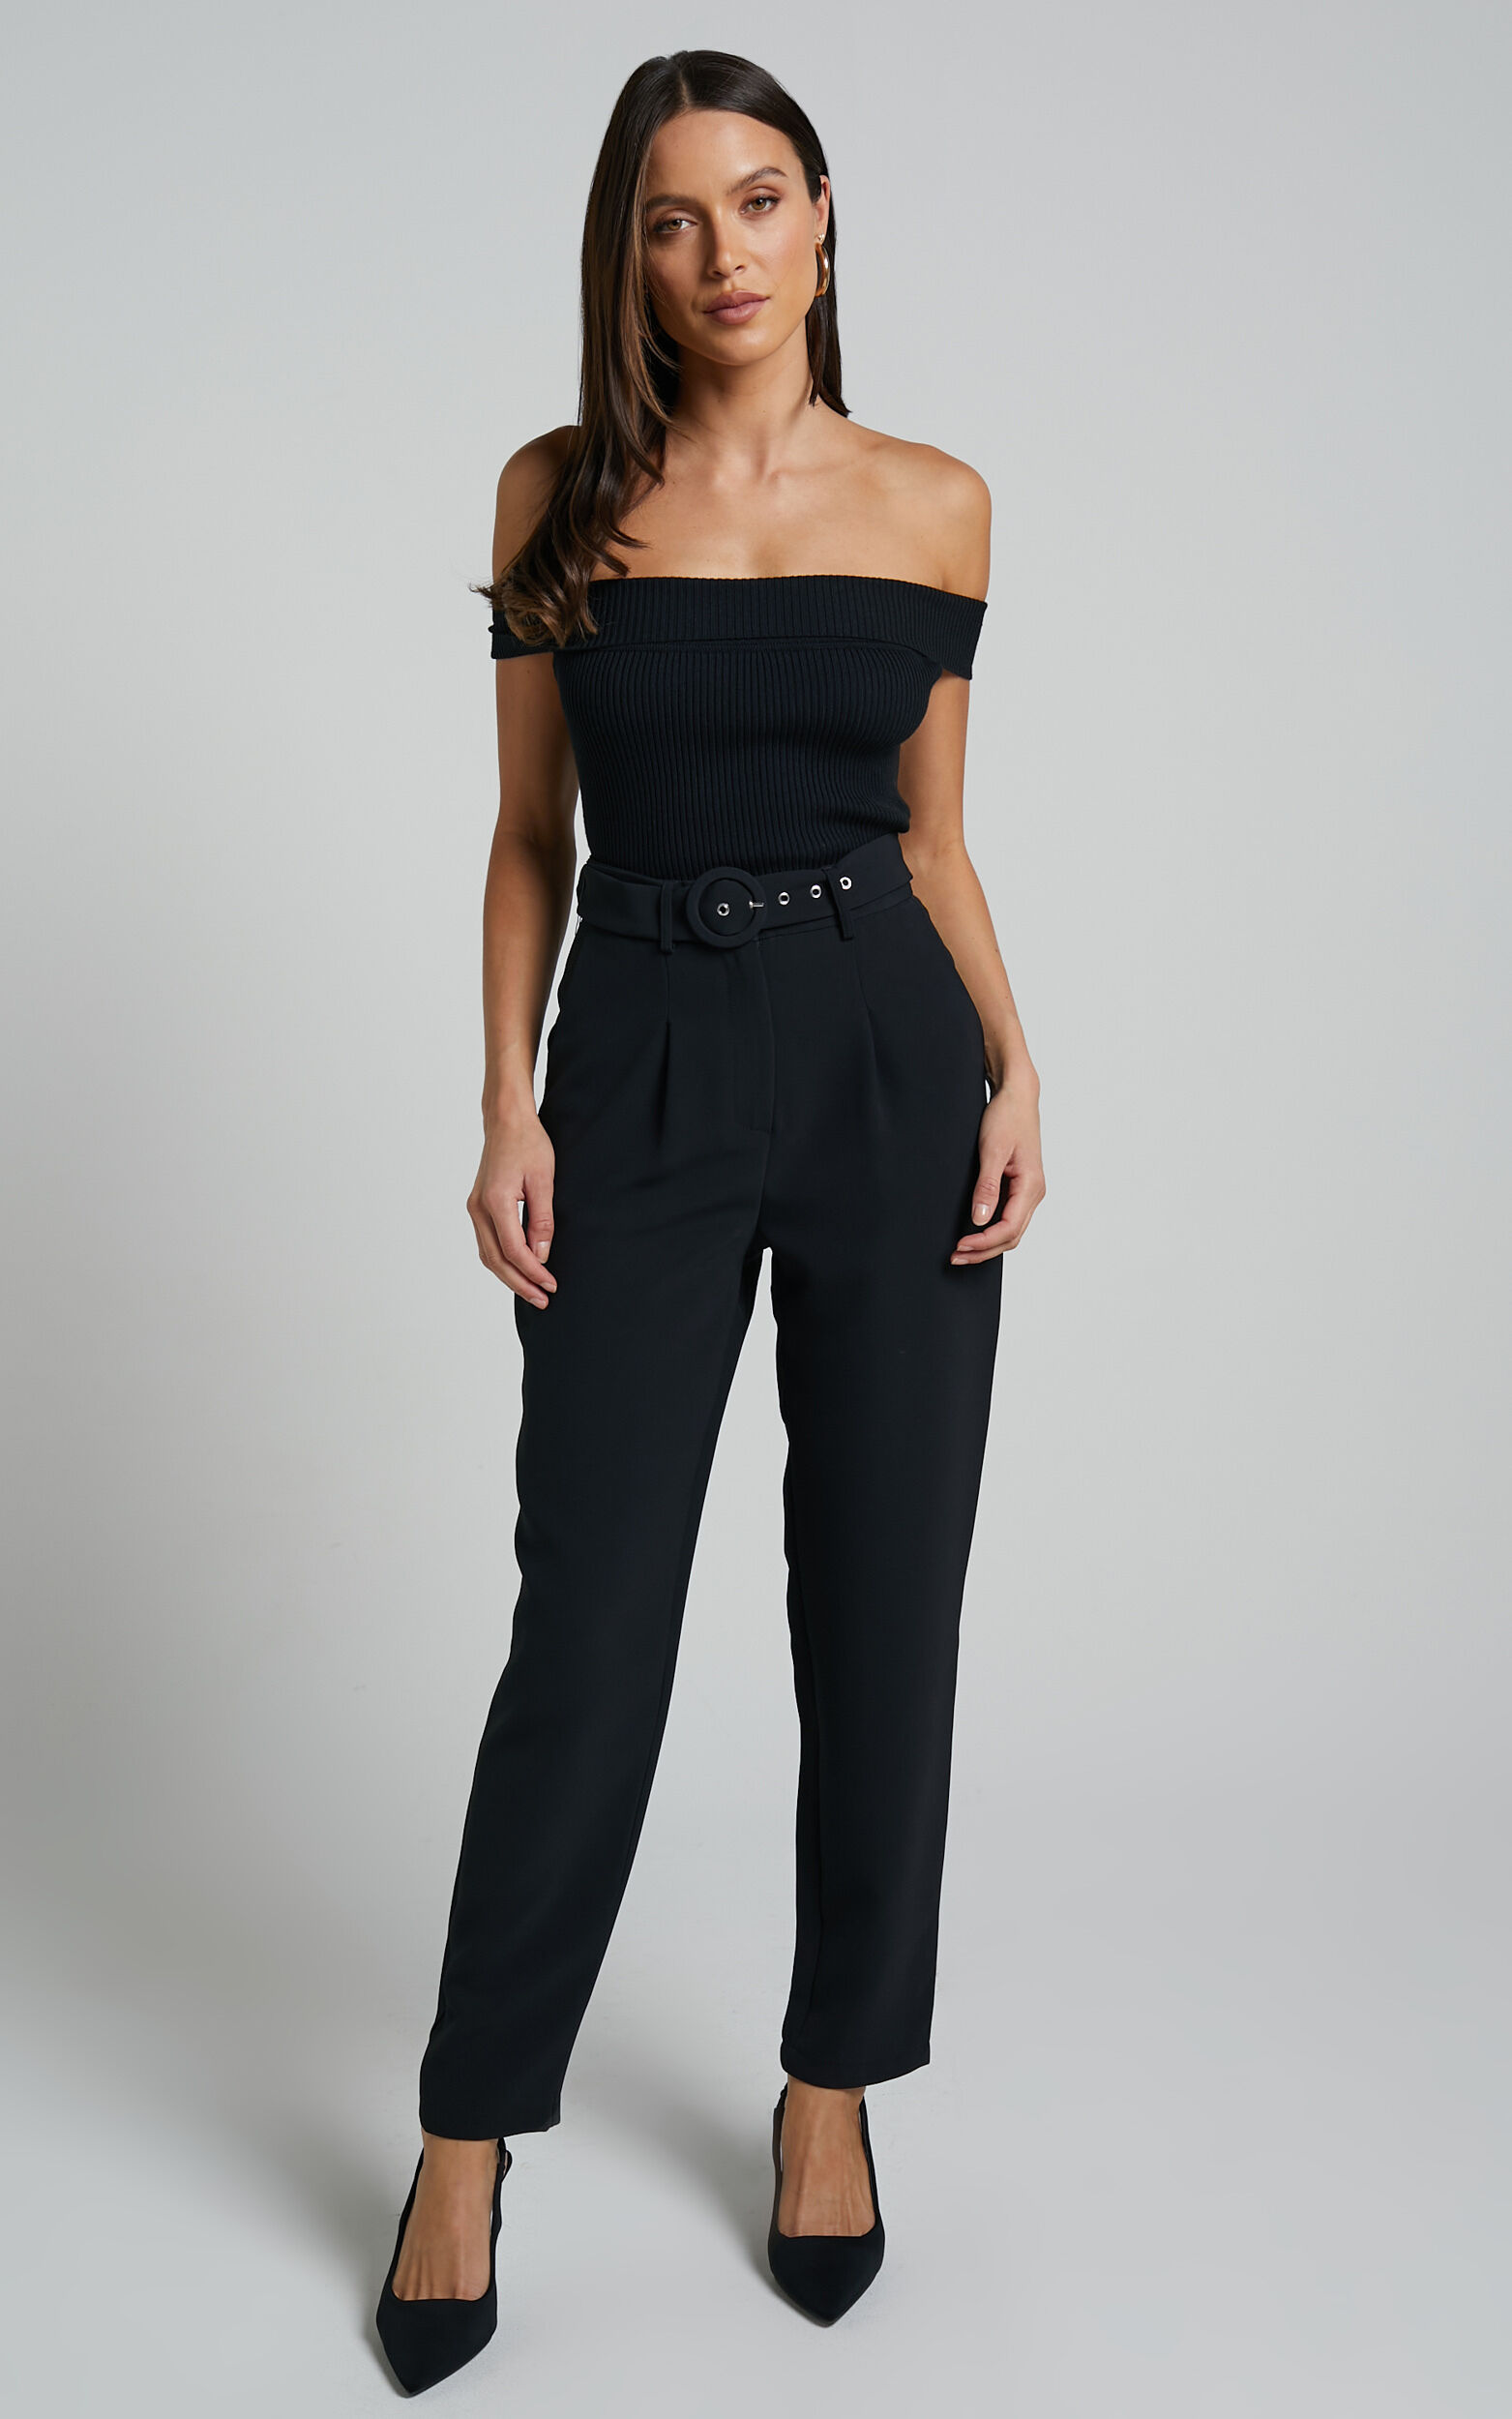 Reyna - High Waisted Tailored Pants in Black - 06, BLK1, super-hi-res image number null